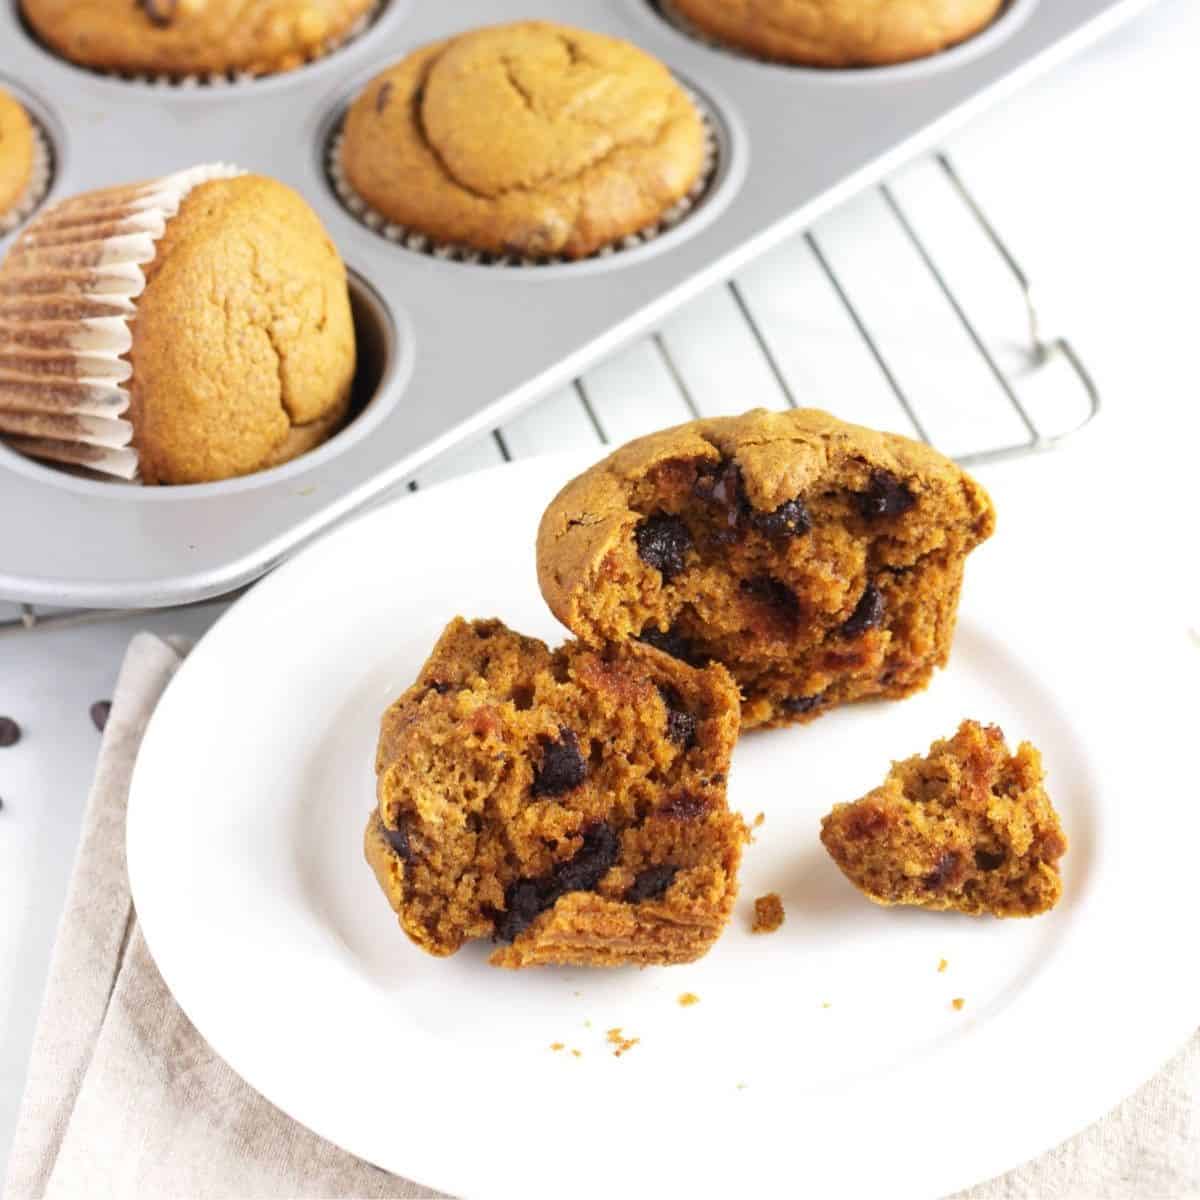 pumpkin muffin with chocolate chips broken open on white plate